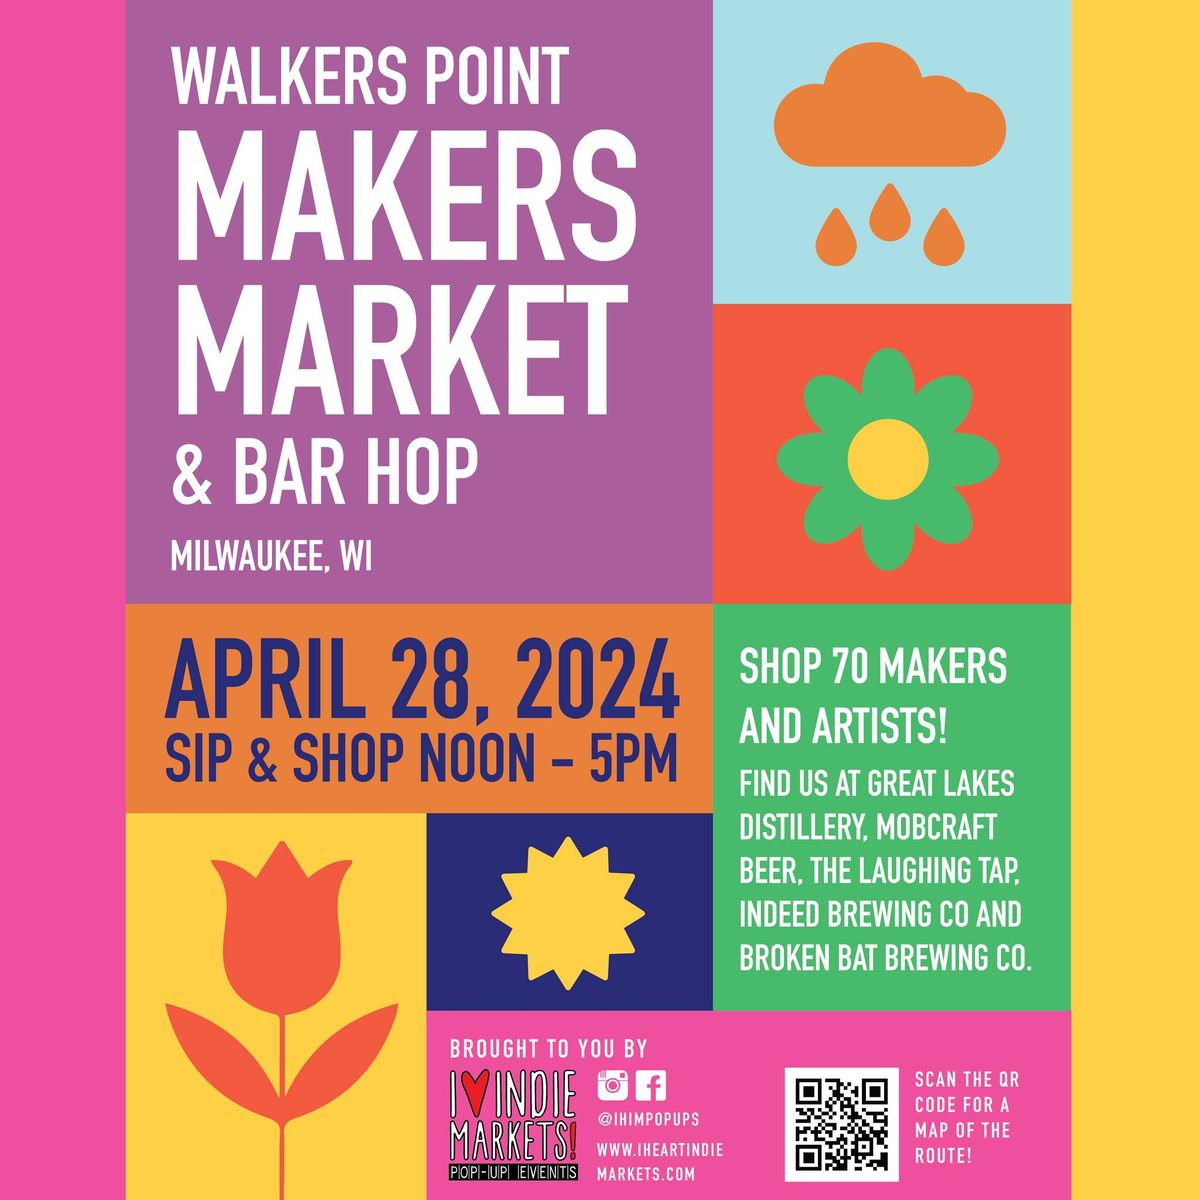 Walkers Point Makers Market & Bar Hop hosted by @ihimpopups